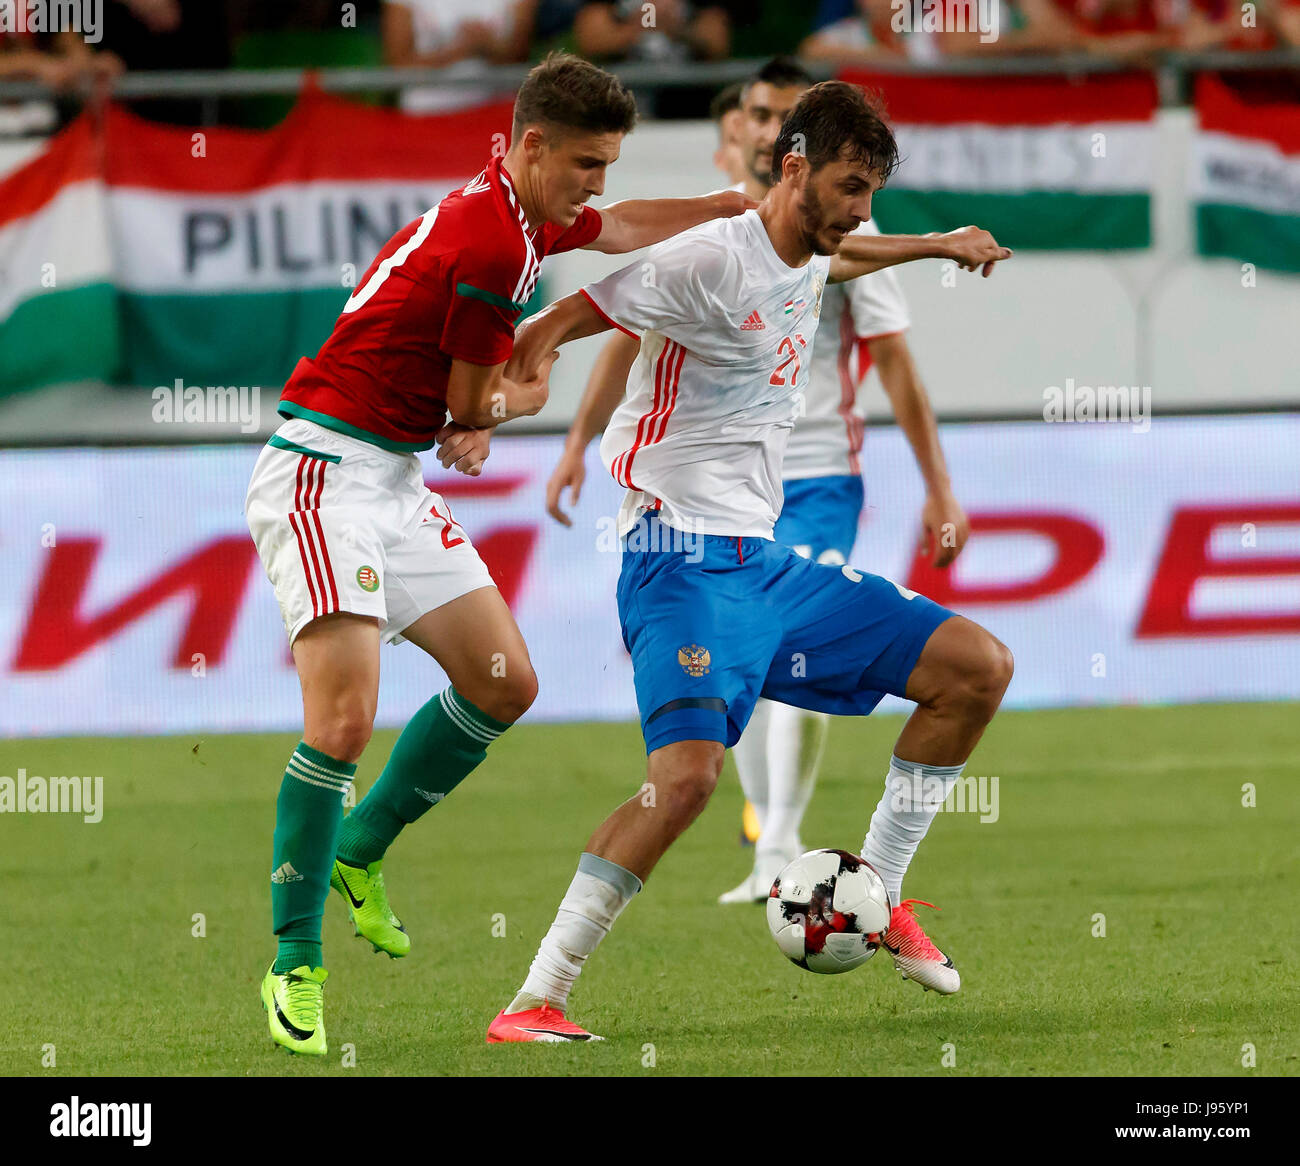 Budapest, Hungary. 05th June, 2017. BUDAPEST, HUNGARY - JUNE 5: Aleksandr Erokhin #21 of Russia wins the ball from Roland Sallai (L) of Hungary during the International Friendly match between Hungary and Russia at Groupama Arena on June 5, 2017 in Budapest, Hungary. Credit: Laszlo Szirtesi/Alamy Live News Stock Photo